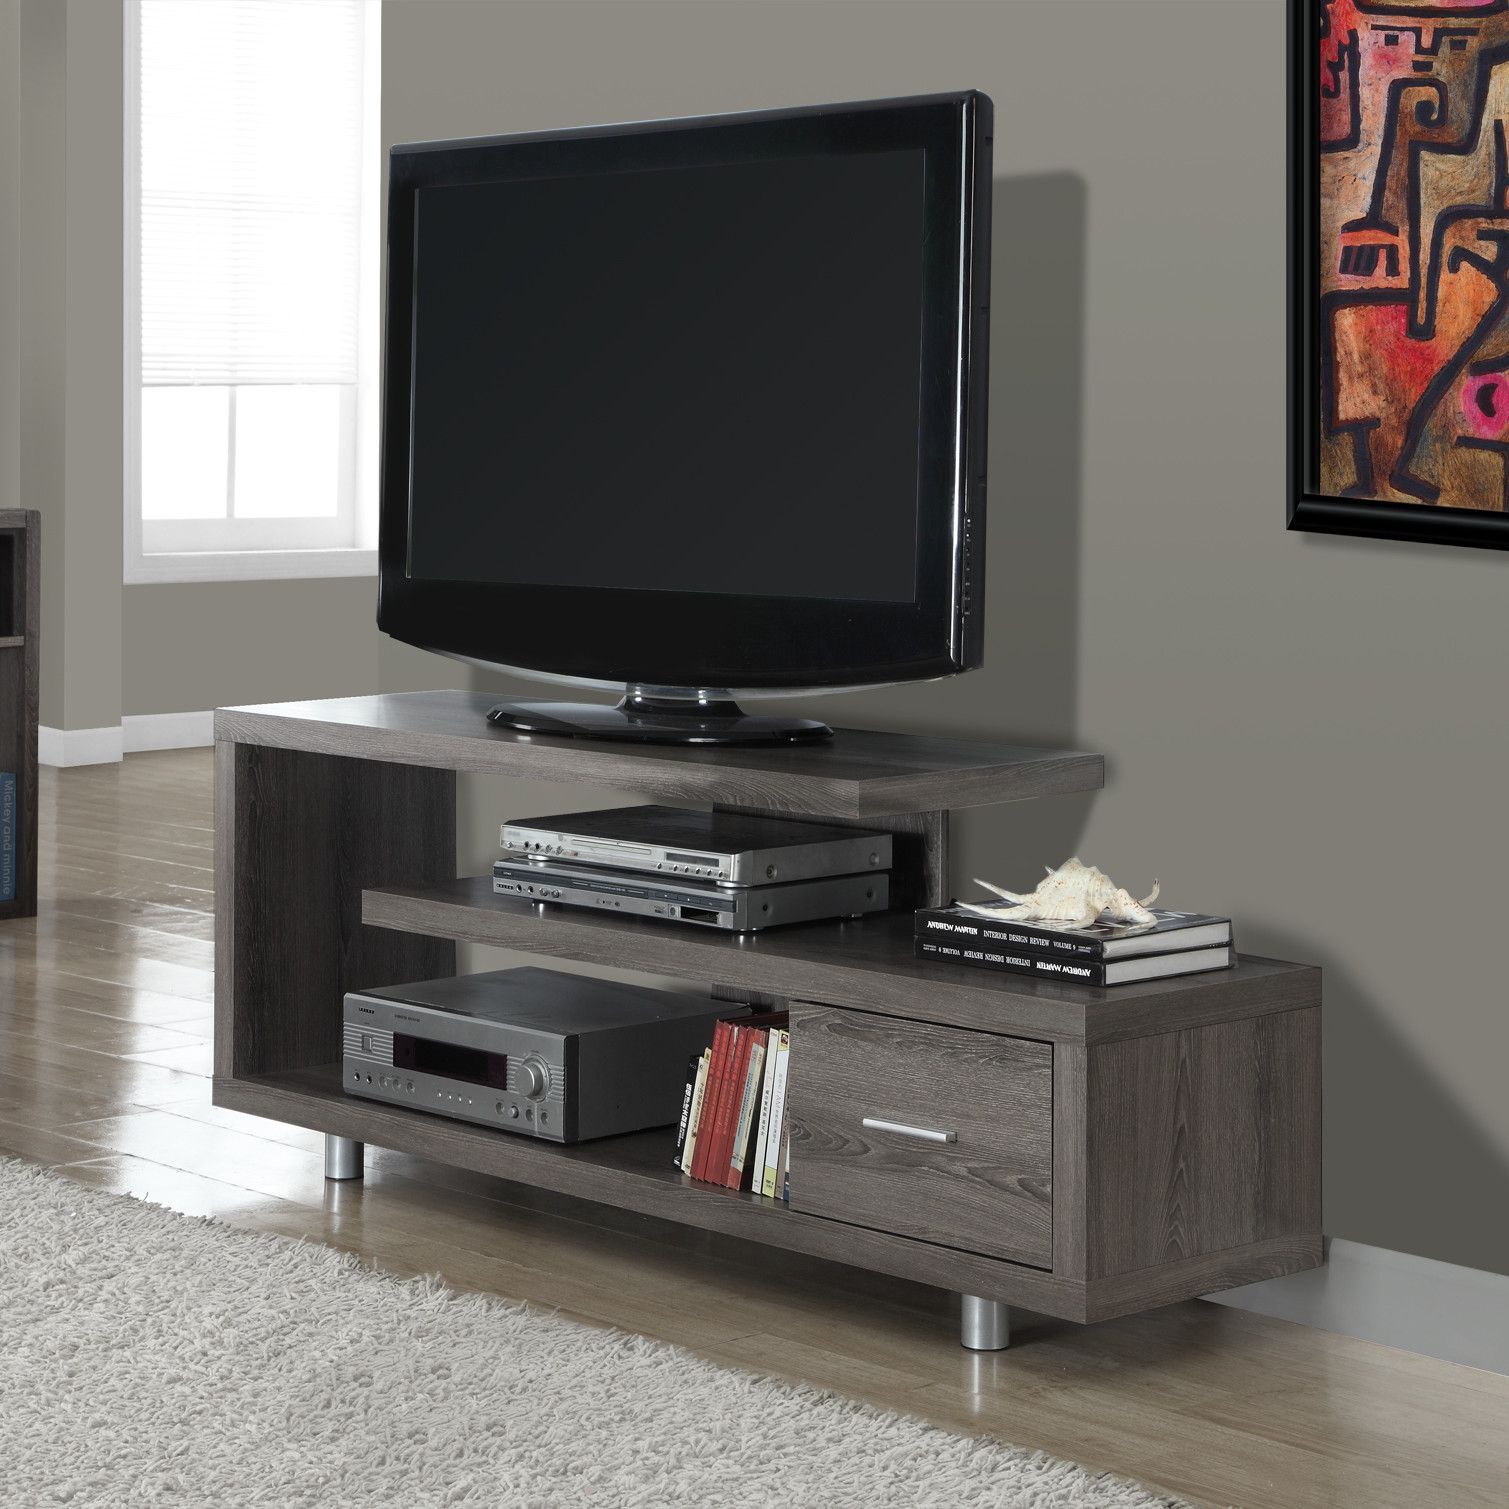 Myrna 60" Tv Stand | Tv Stands And Products Inside Laurent 60 Inch Tv Stands (View 5 of 30)